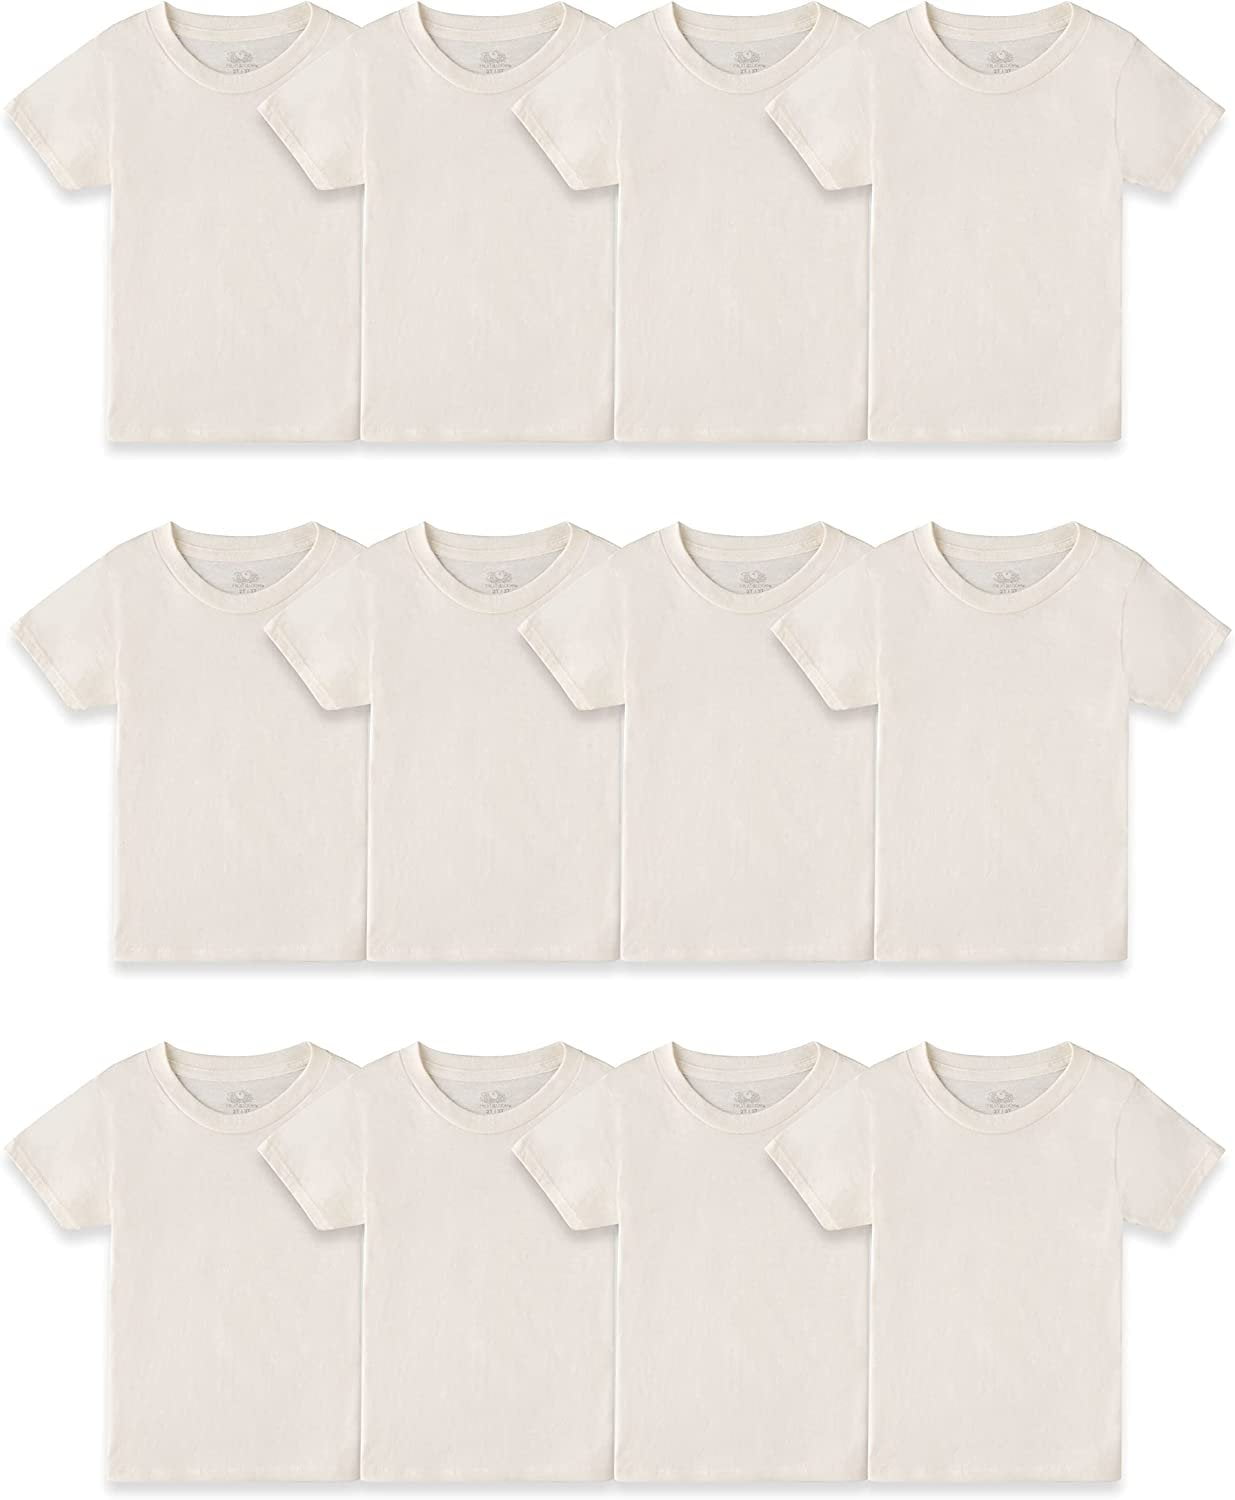 Fruit of The Loom Boys' Cotton White T Shirt, Toddler-12 Pack-Natural, 2-3T, Toddler Boy's, Size: 2T-3T